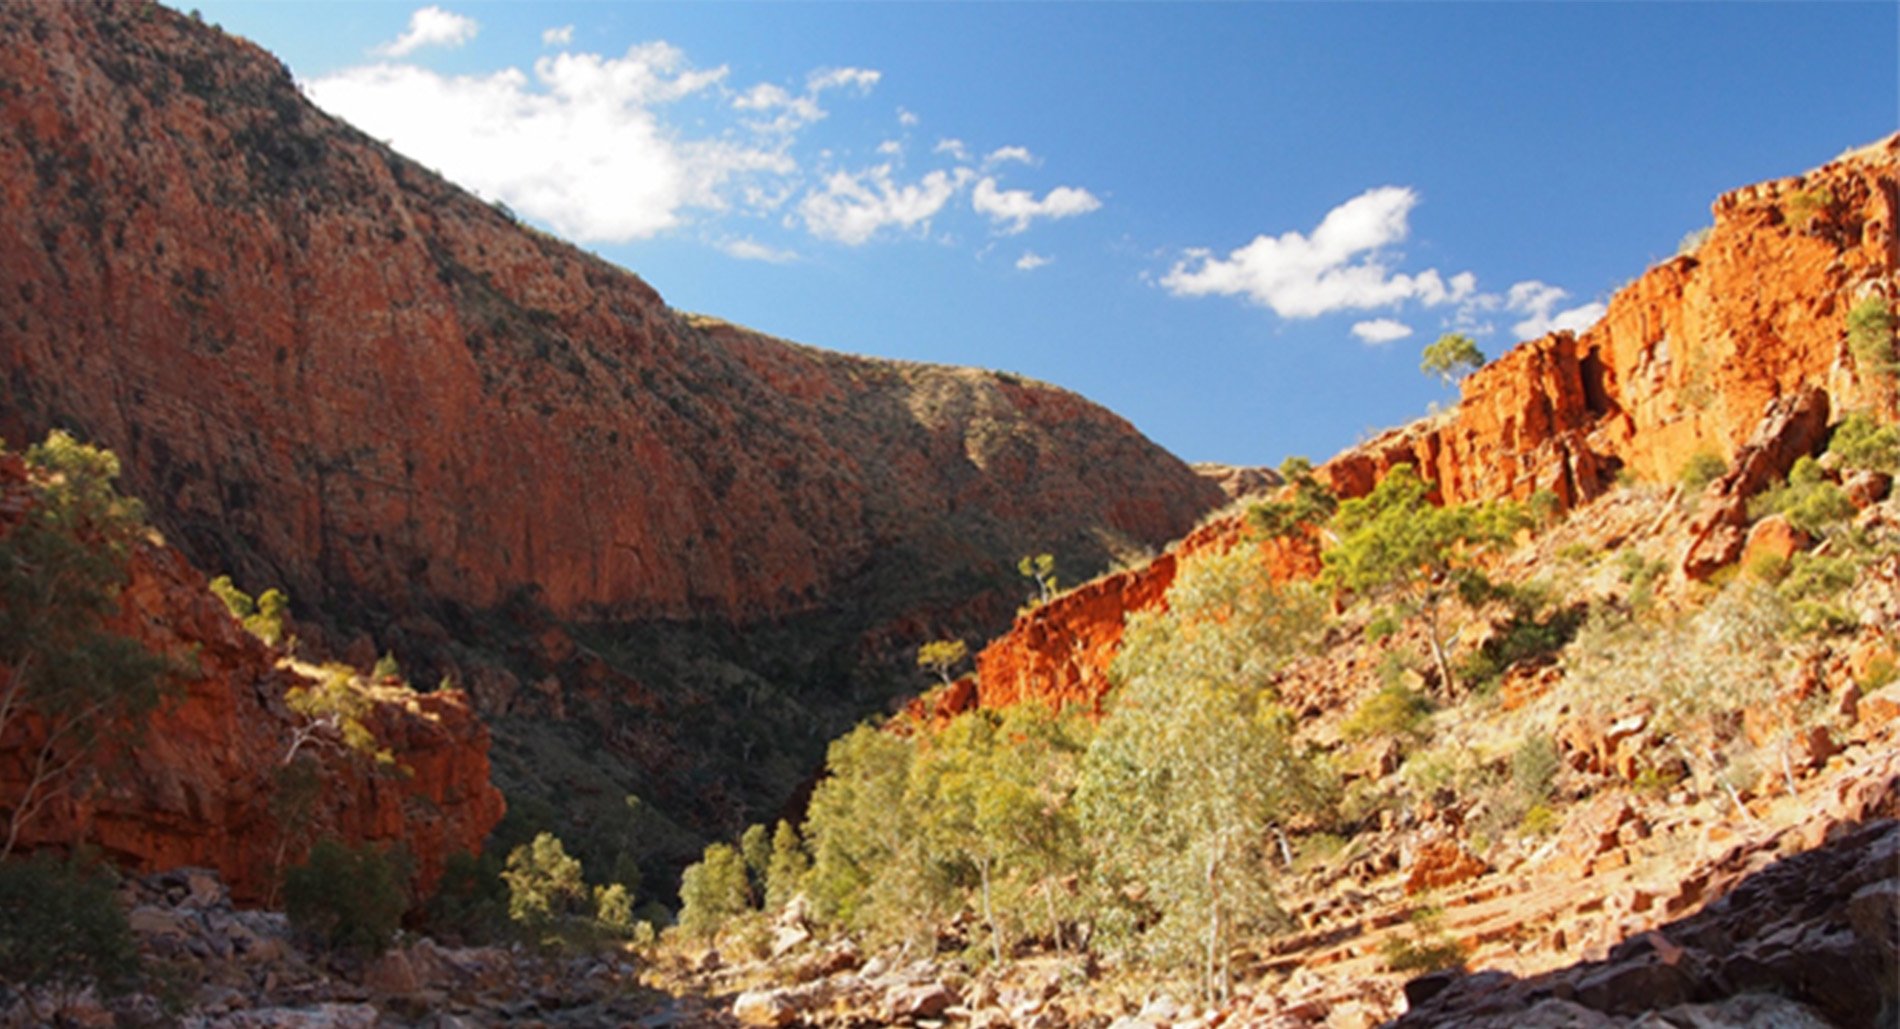 A section of the Larapinta Trail -- a beautiful orange stone gorge © Private